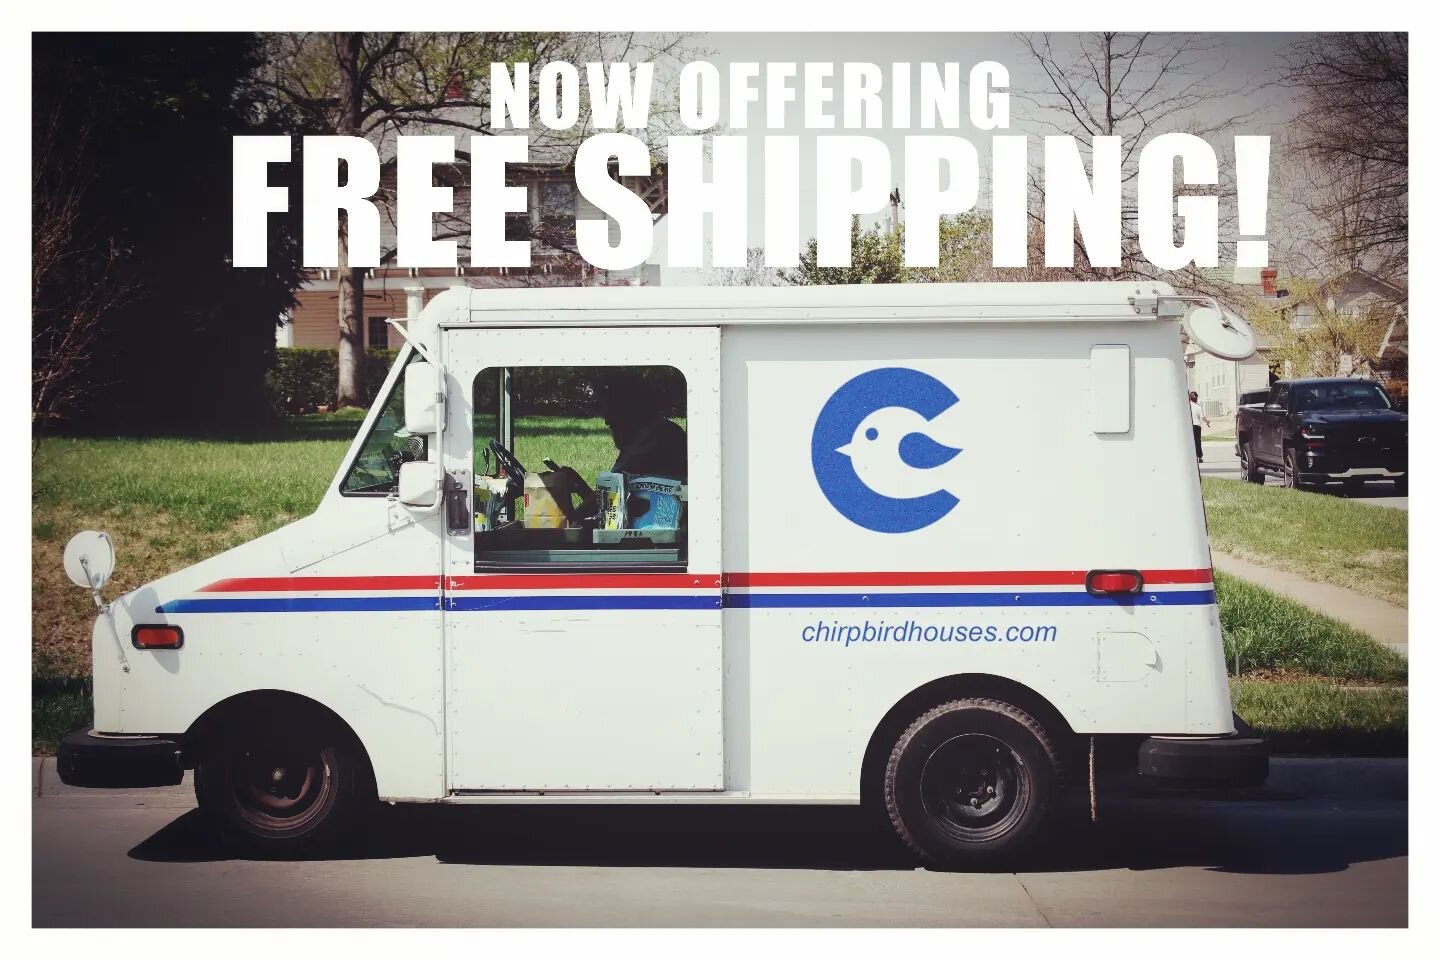 We're happy to now offer FREE SHIPPING on all Chirp Birdhouse orders! 🆓🚚
.
(domestic only)
.
.
.
.
.
#chirp #chirpbirdhouses #birdhouse #birdhouses #birdhousekit #birdhousekits #birdhousesofinstagram #birdhouselove #birdhouseart #modernbirdhouses #